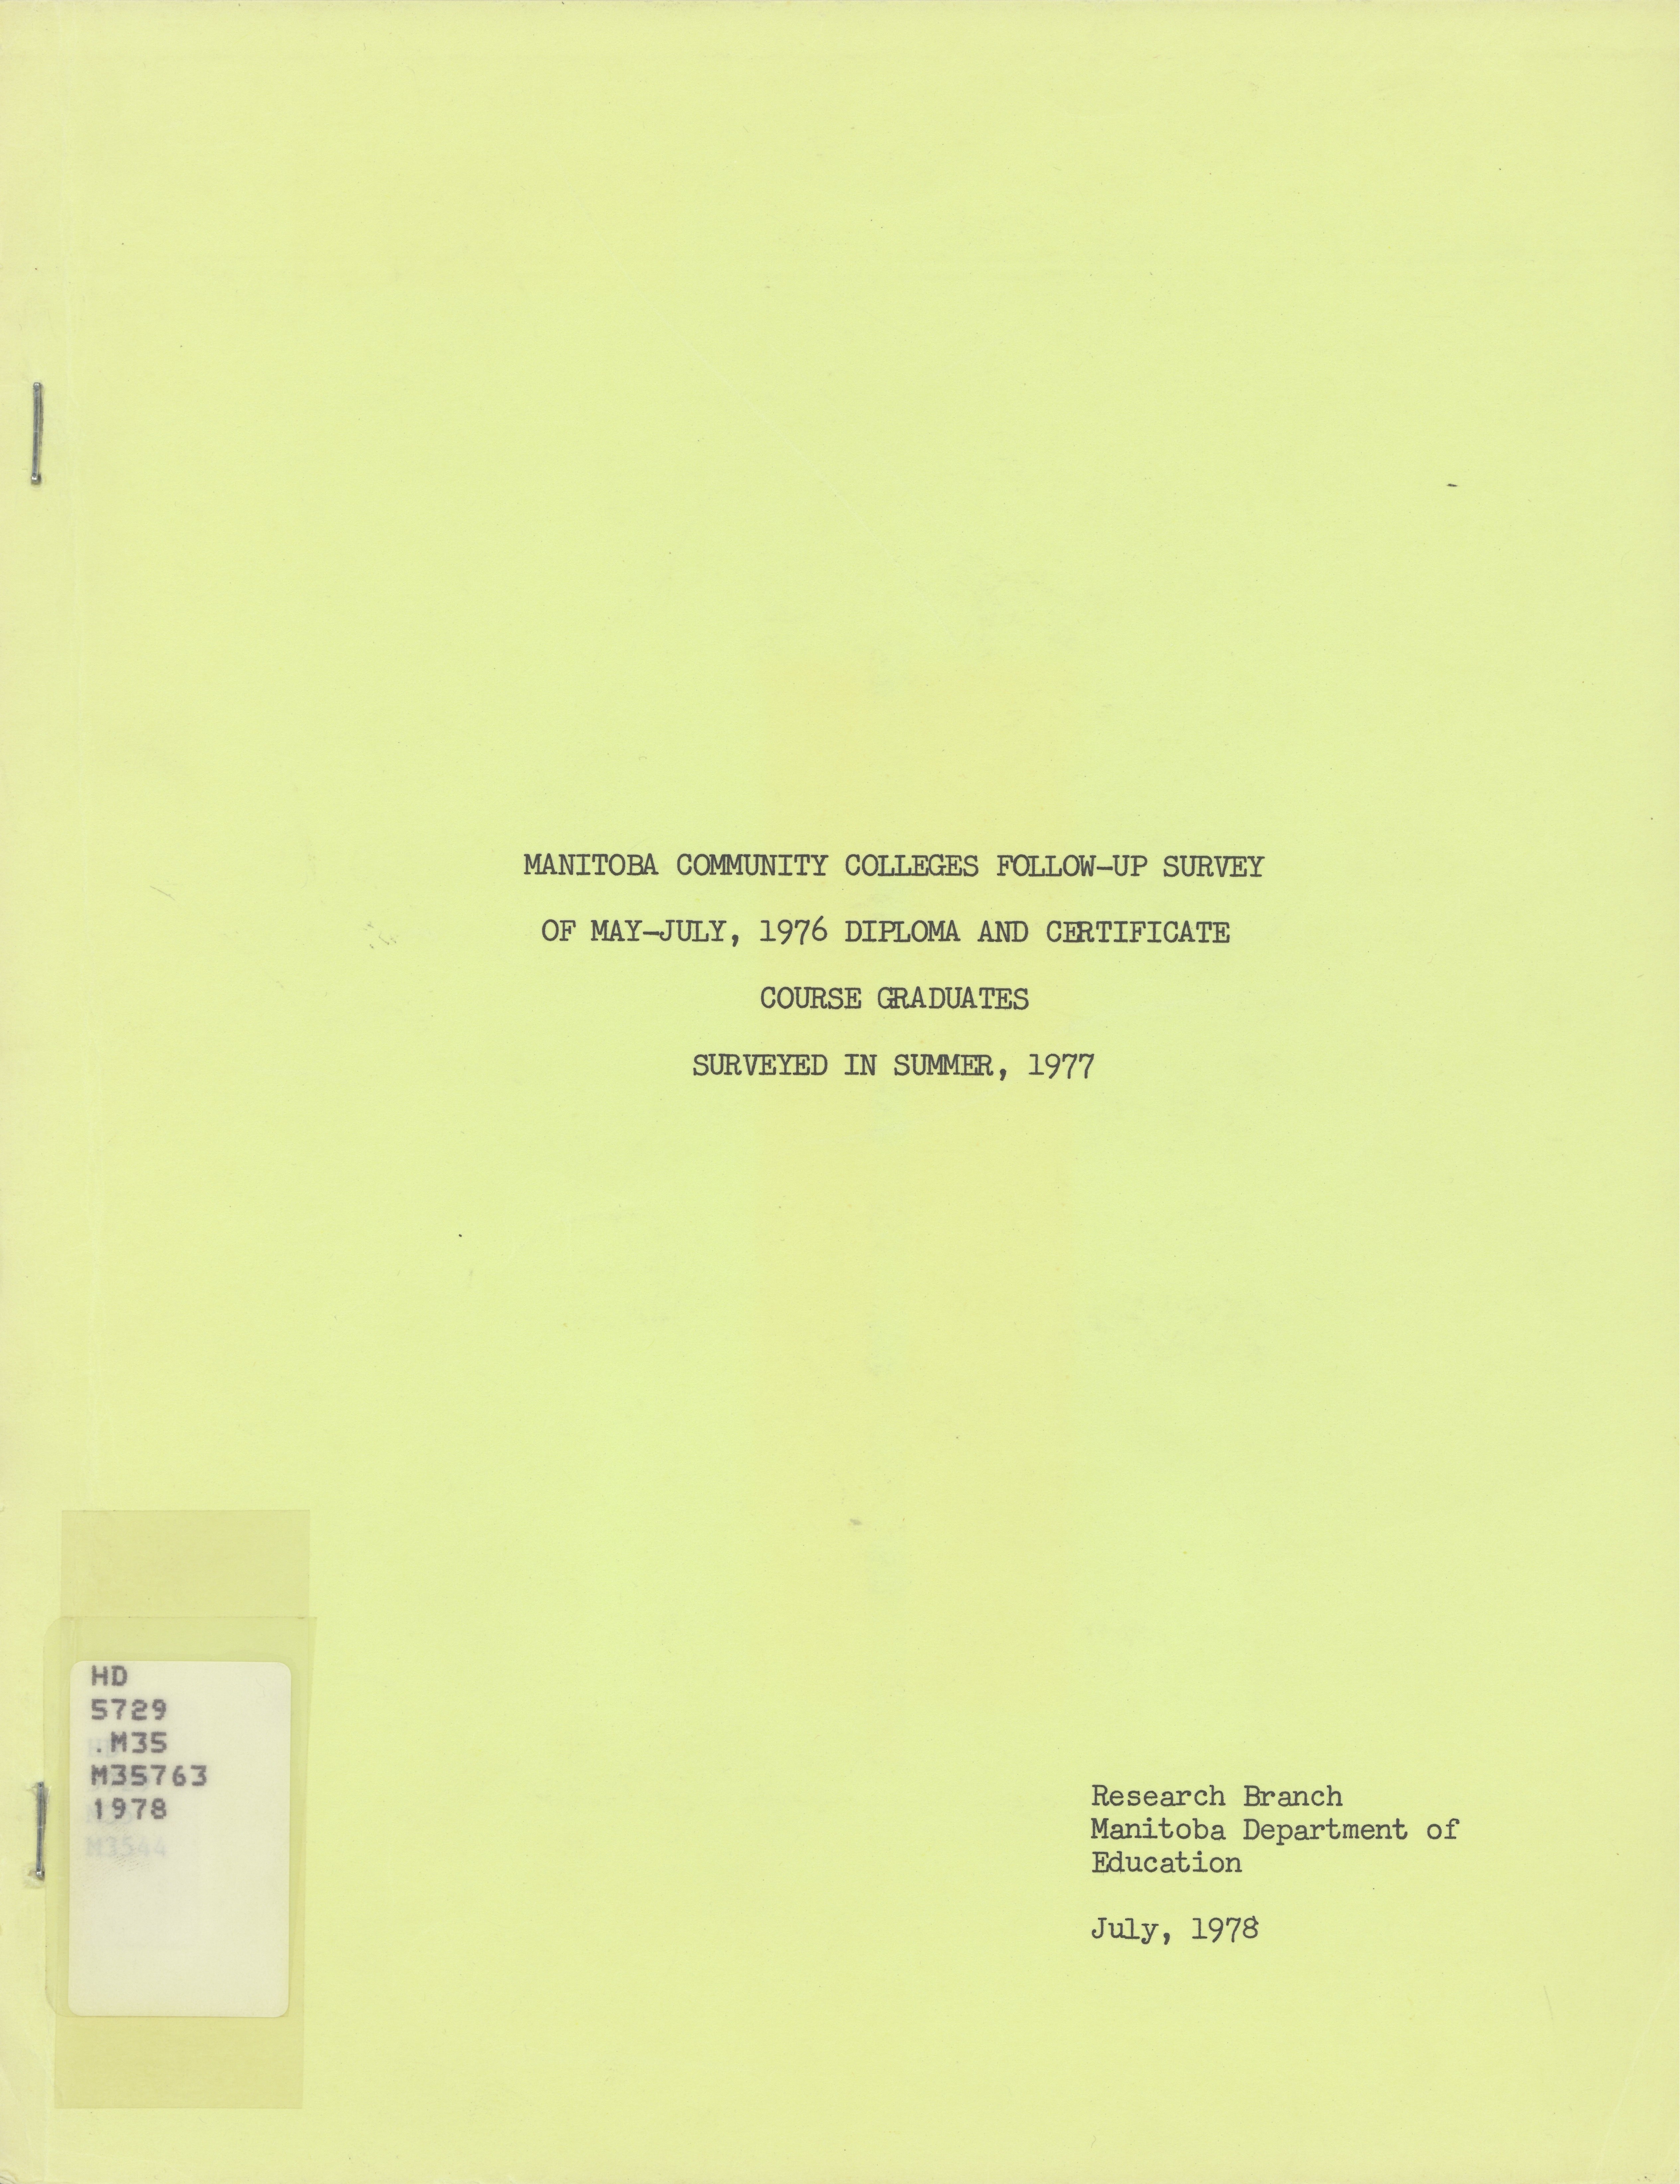 Manitoba community colleges follow-up survey of May-July,  1976 diploma and certificate course graduates: surveyed in  summer, 1977